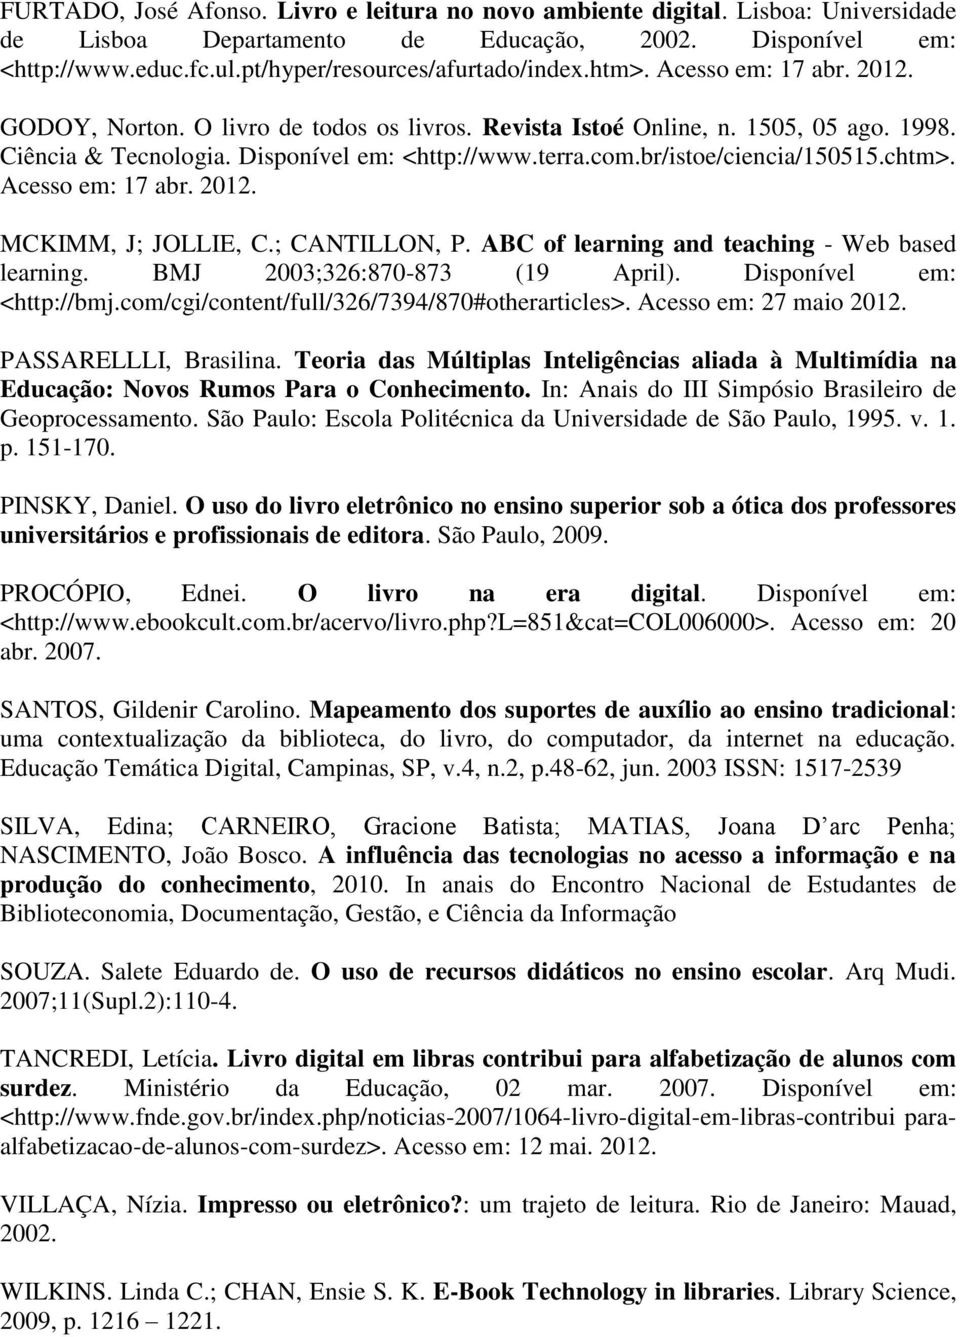 br/istoe/ciencia/150515.chtm>. Acesso em: 17 abr. 2012. MCKIMM, J; JOLLIE, C.; CANTILLON, P. ABC of learning and teaching - Web based learning. BMJ 2003;326:870-873 (19 April).